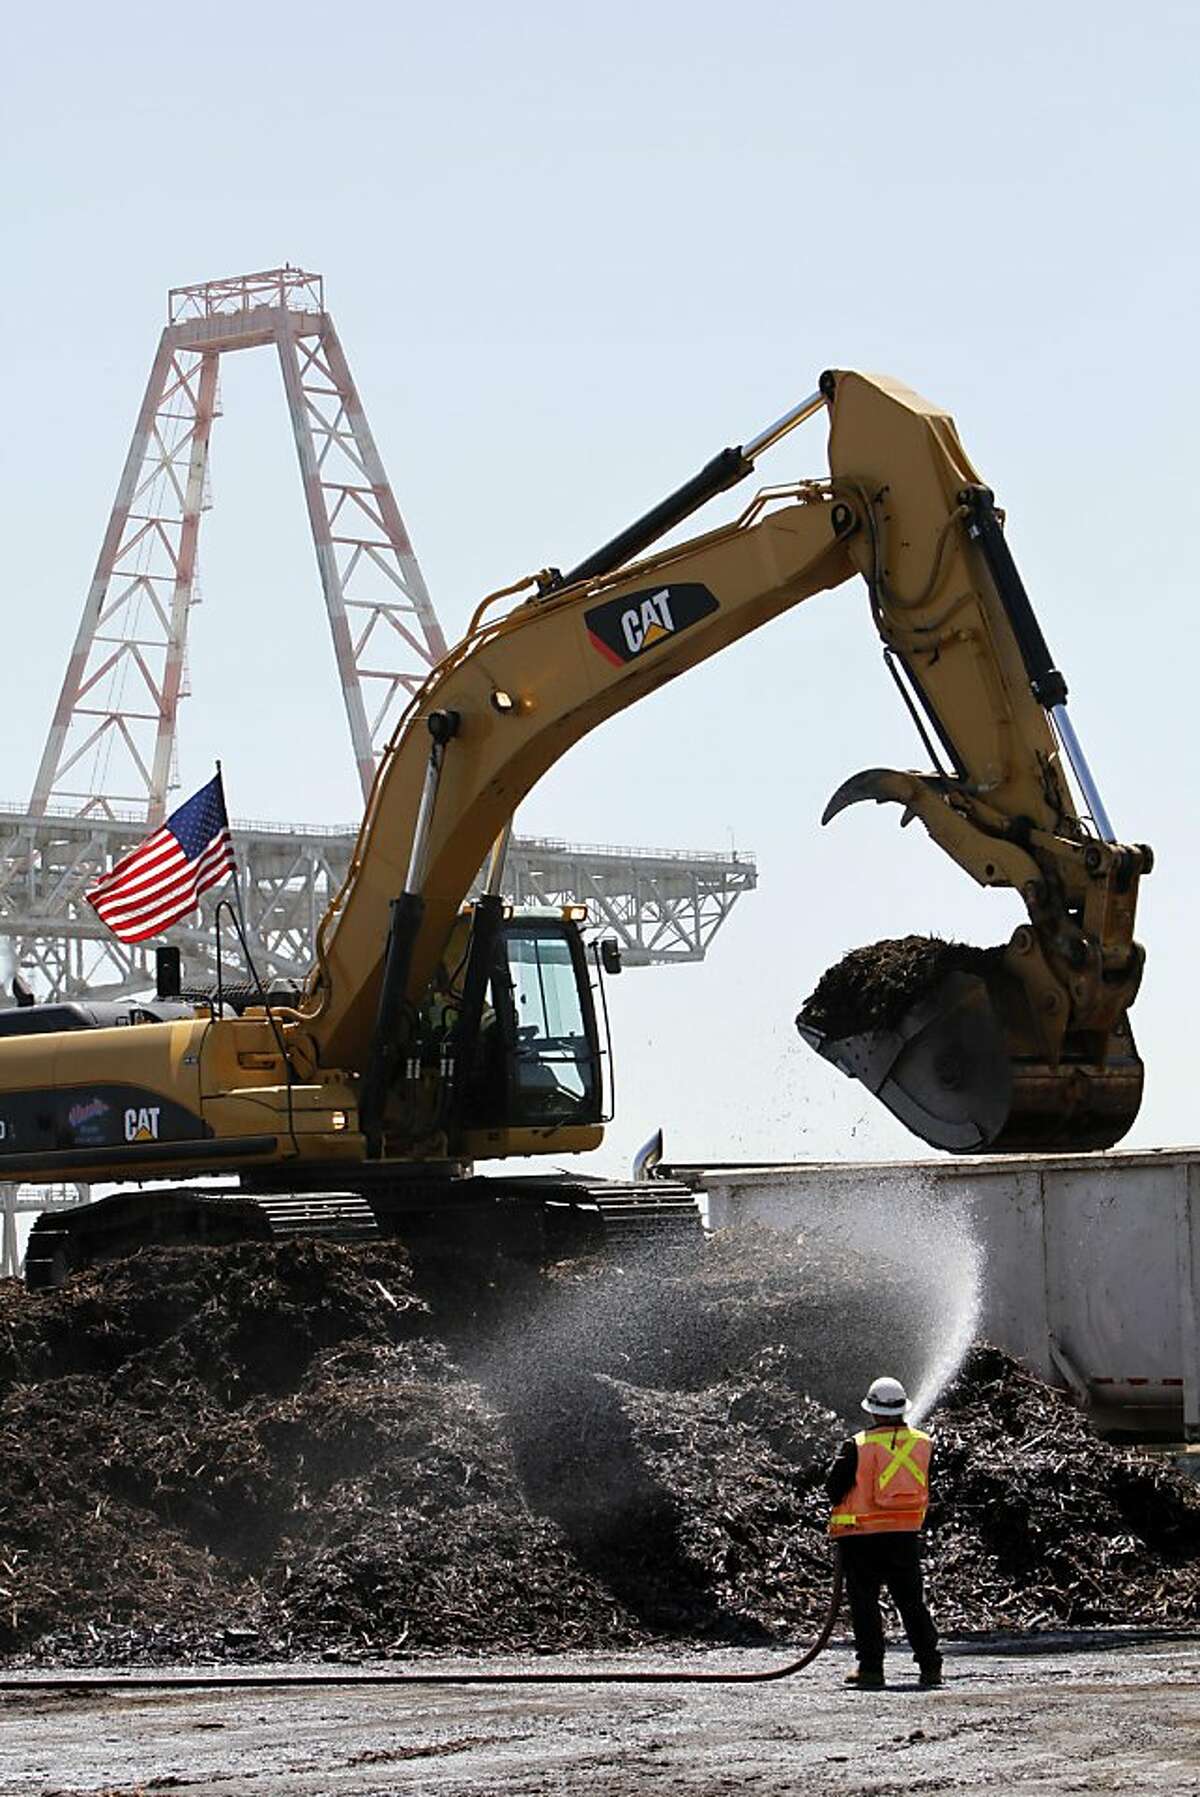 A worker sprays down piles of mulch created from dismantling old piers at Hunter's Point Naval Shipyard in San Francisco, Calif., Thursday, September 1, 2011. The Navy has been working with the EPA to clean up the toxic site.